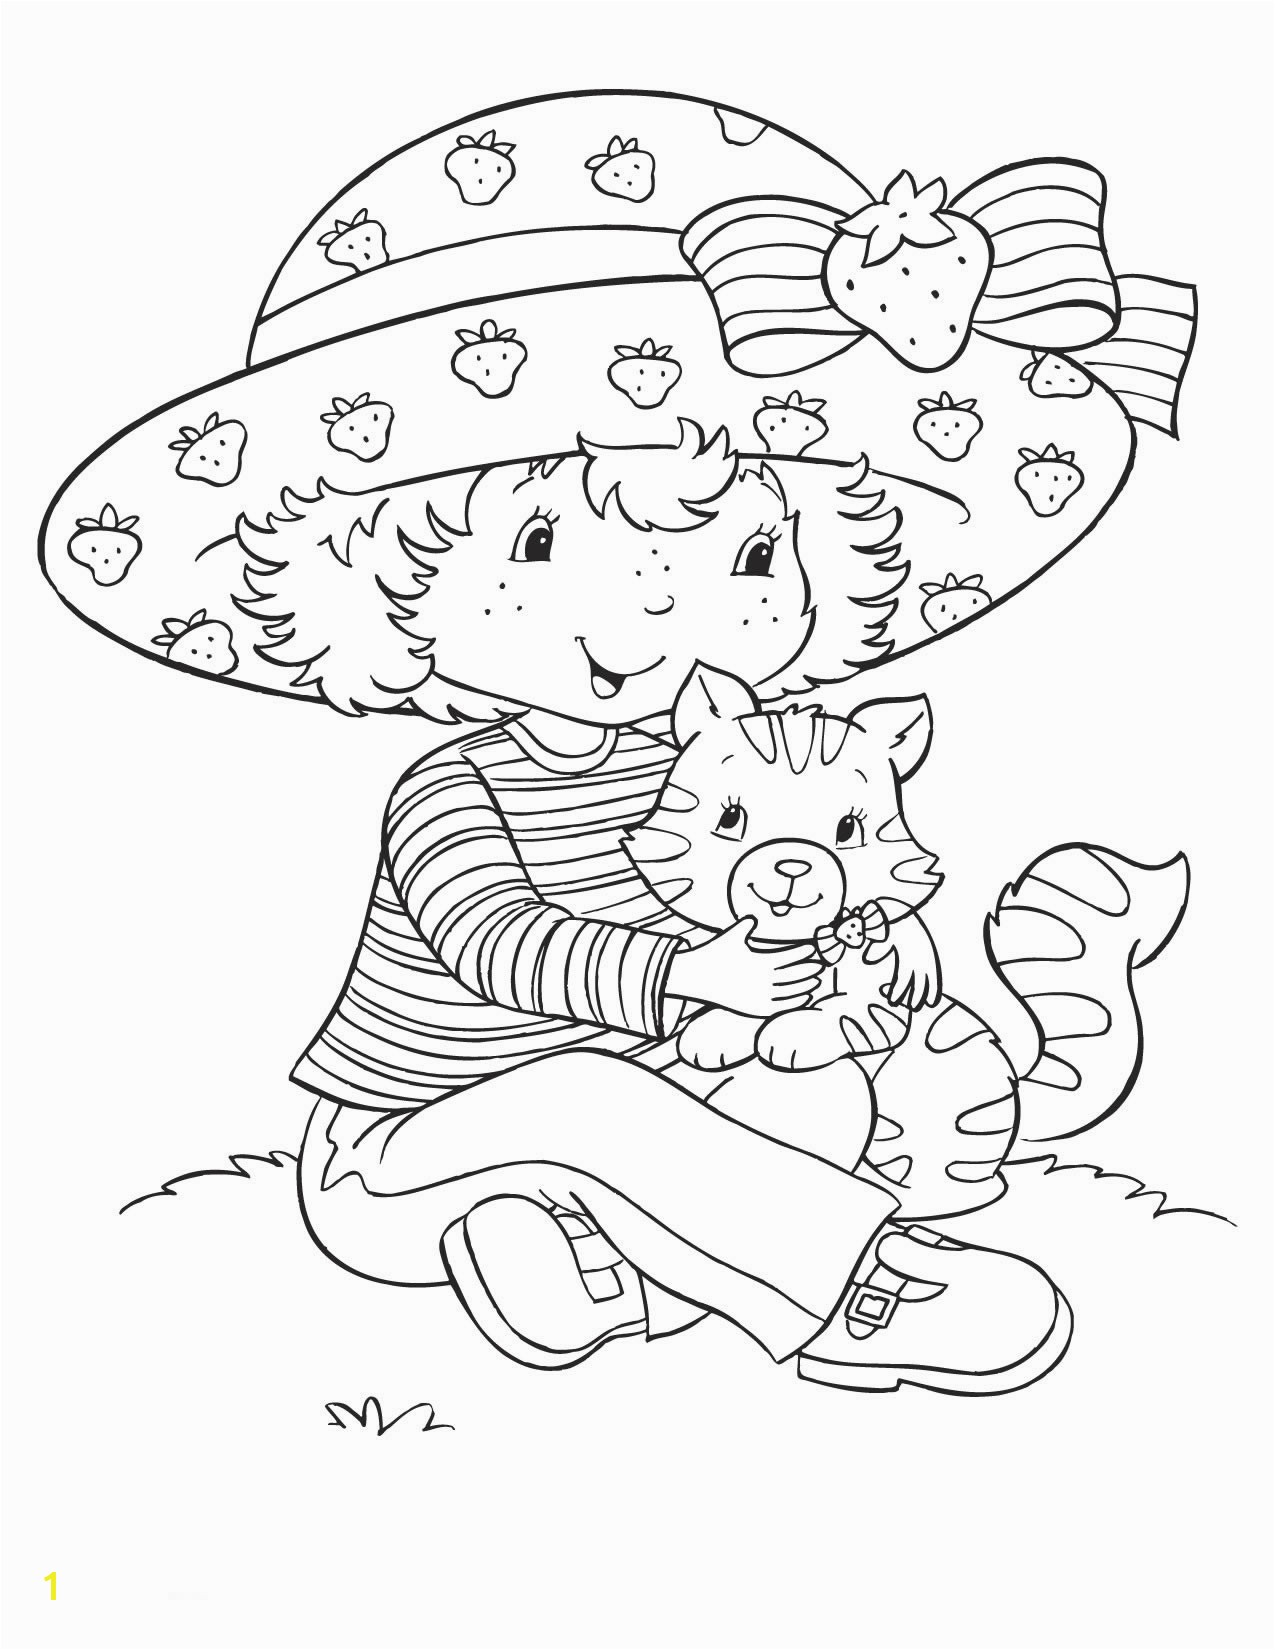 Strawberry Shortcake Free Coloring Pages to Print Free Printable Strawberry Shortcake Coloring Pages for Kids